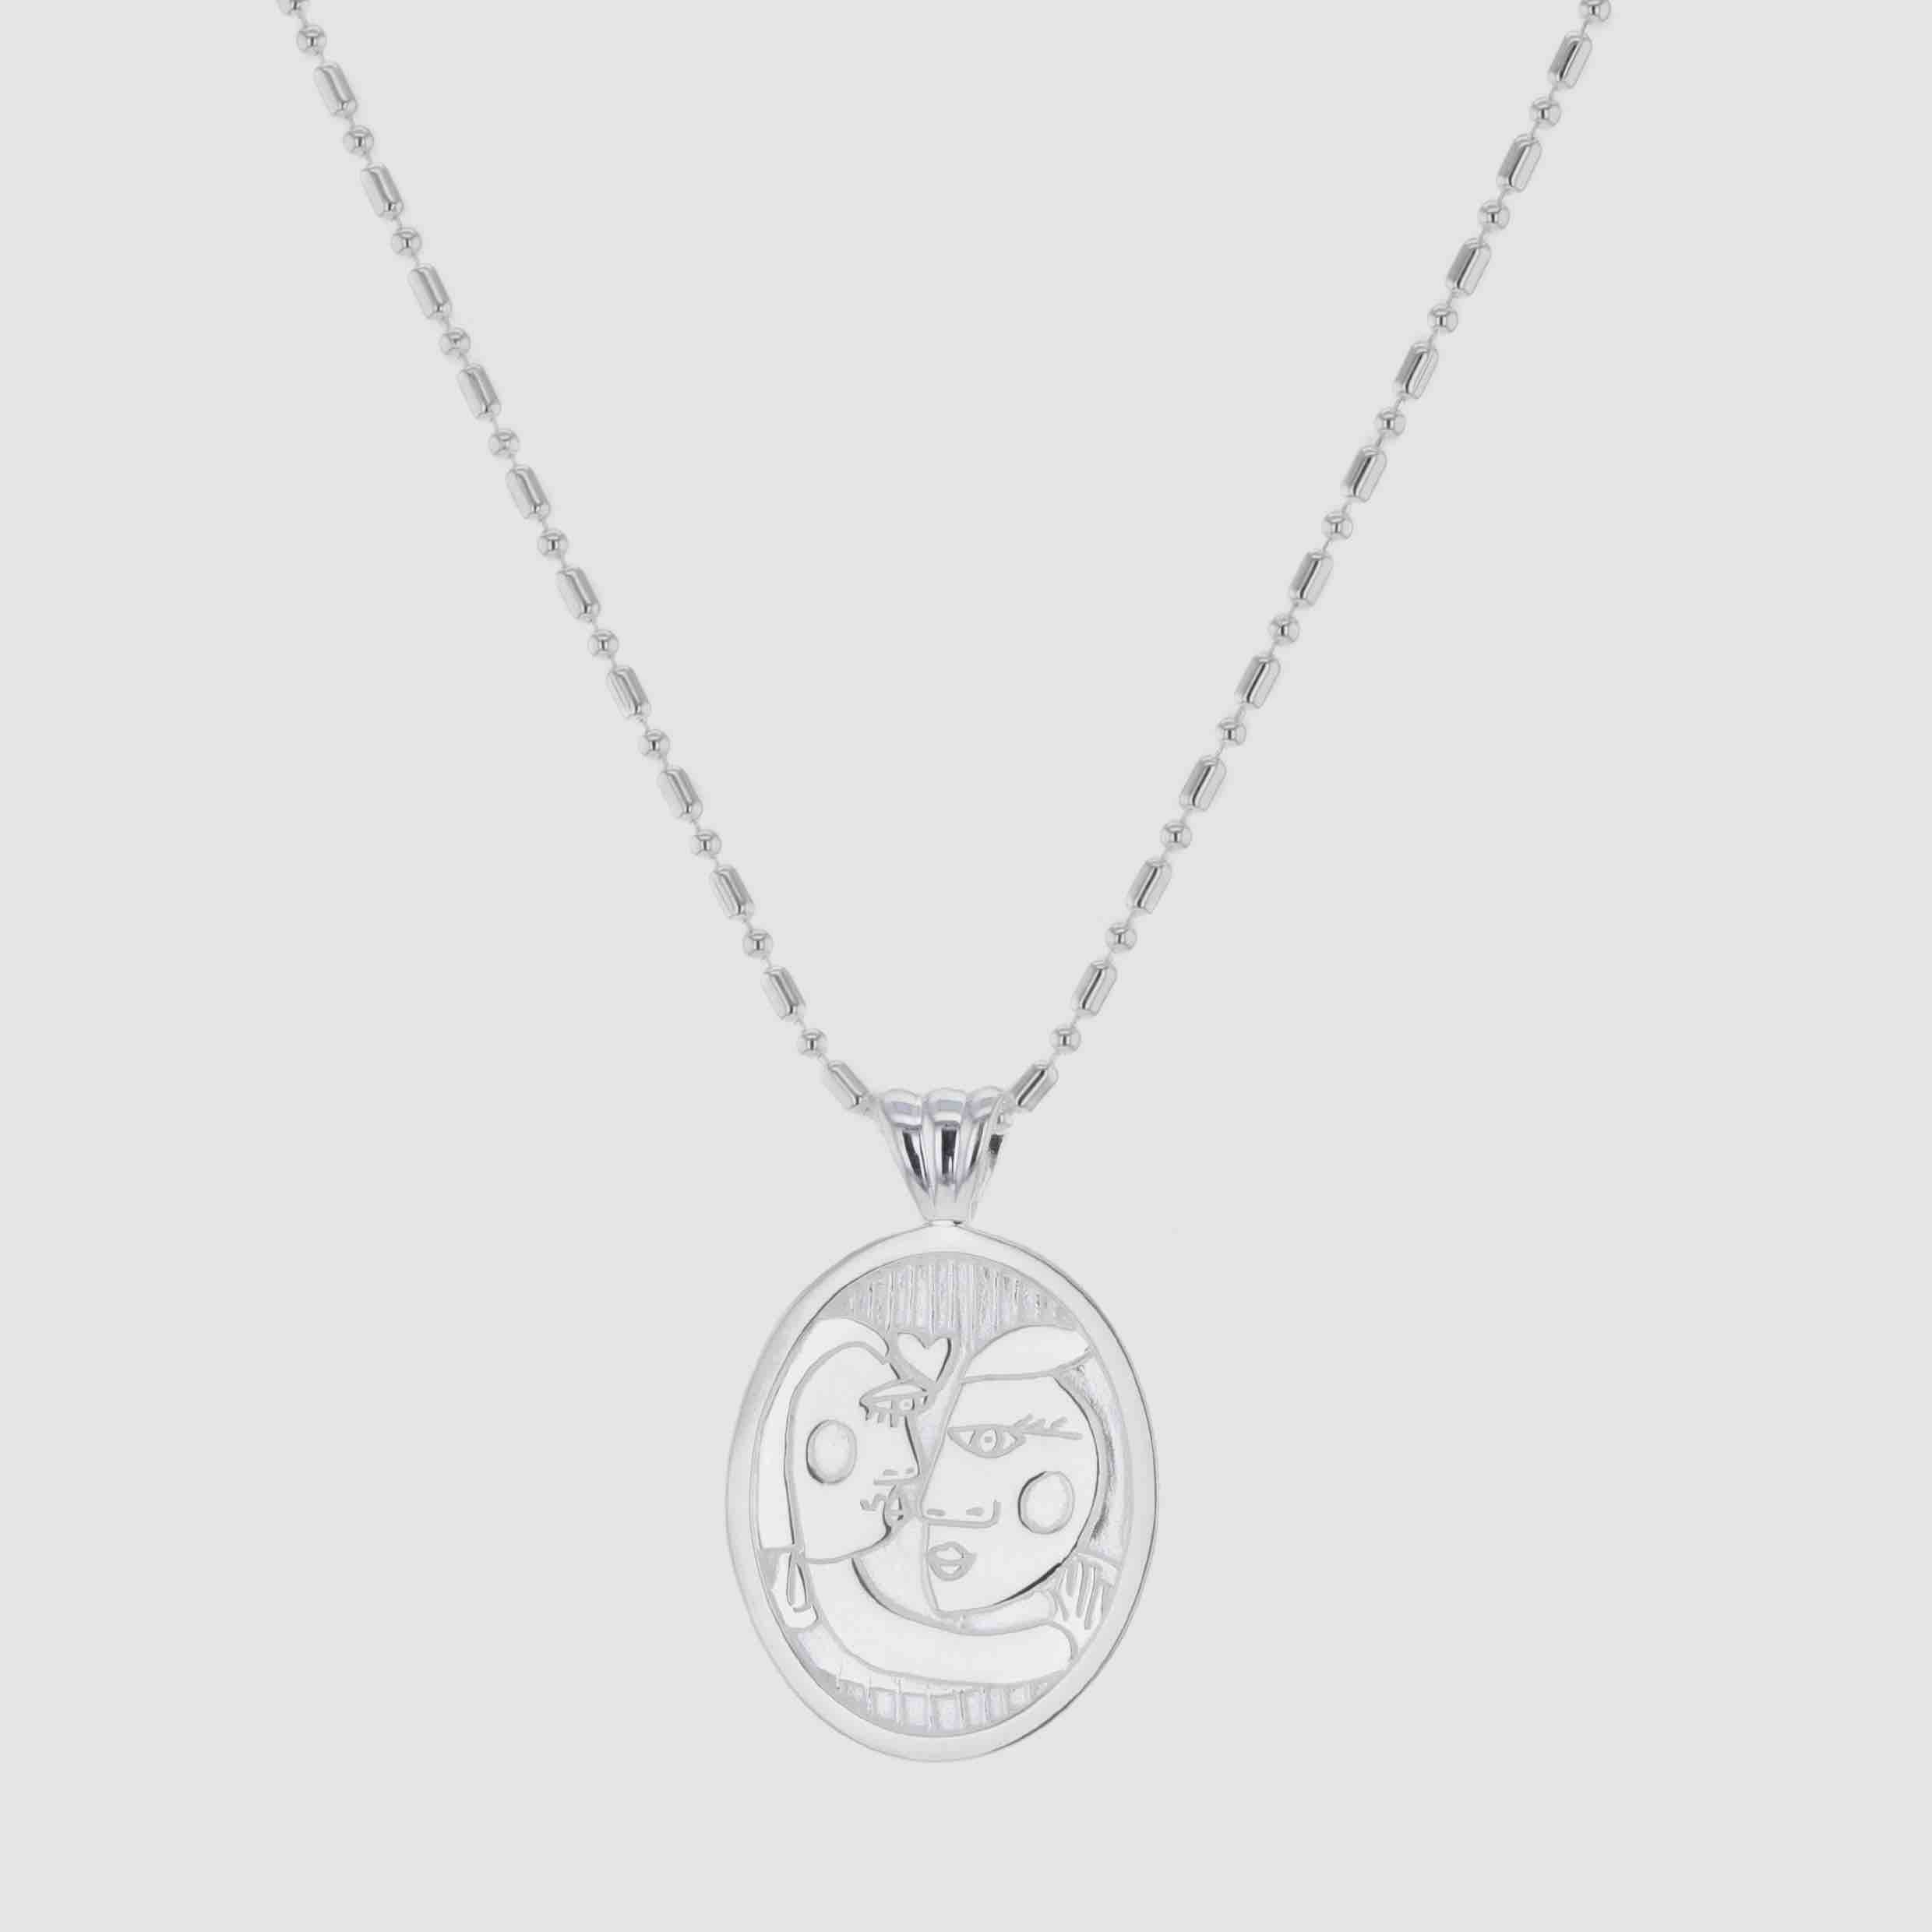 Lovers necklace silver from the Faces collection - Hasla Jewelry